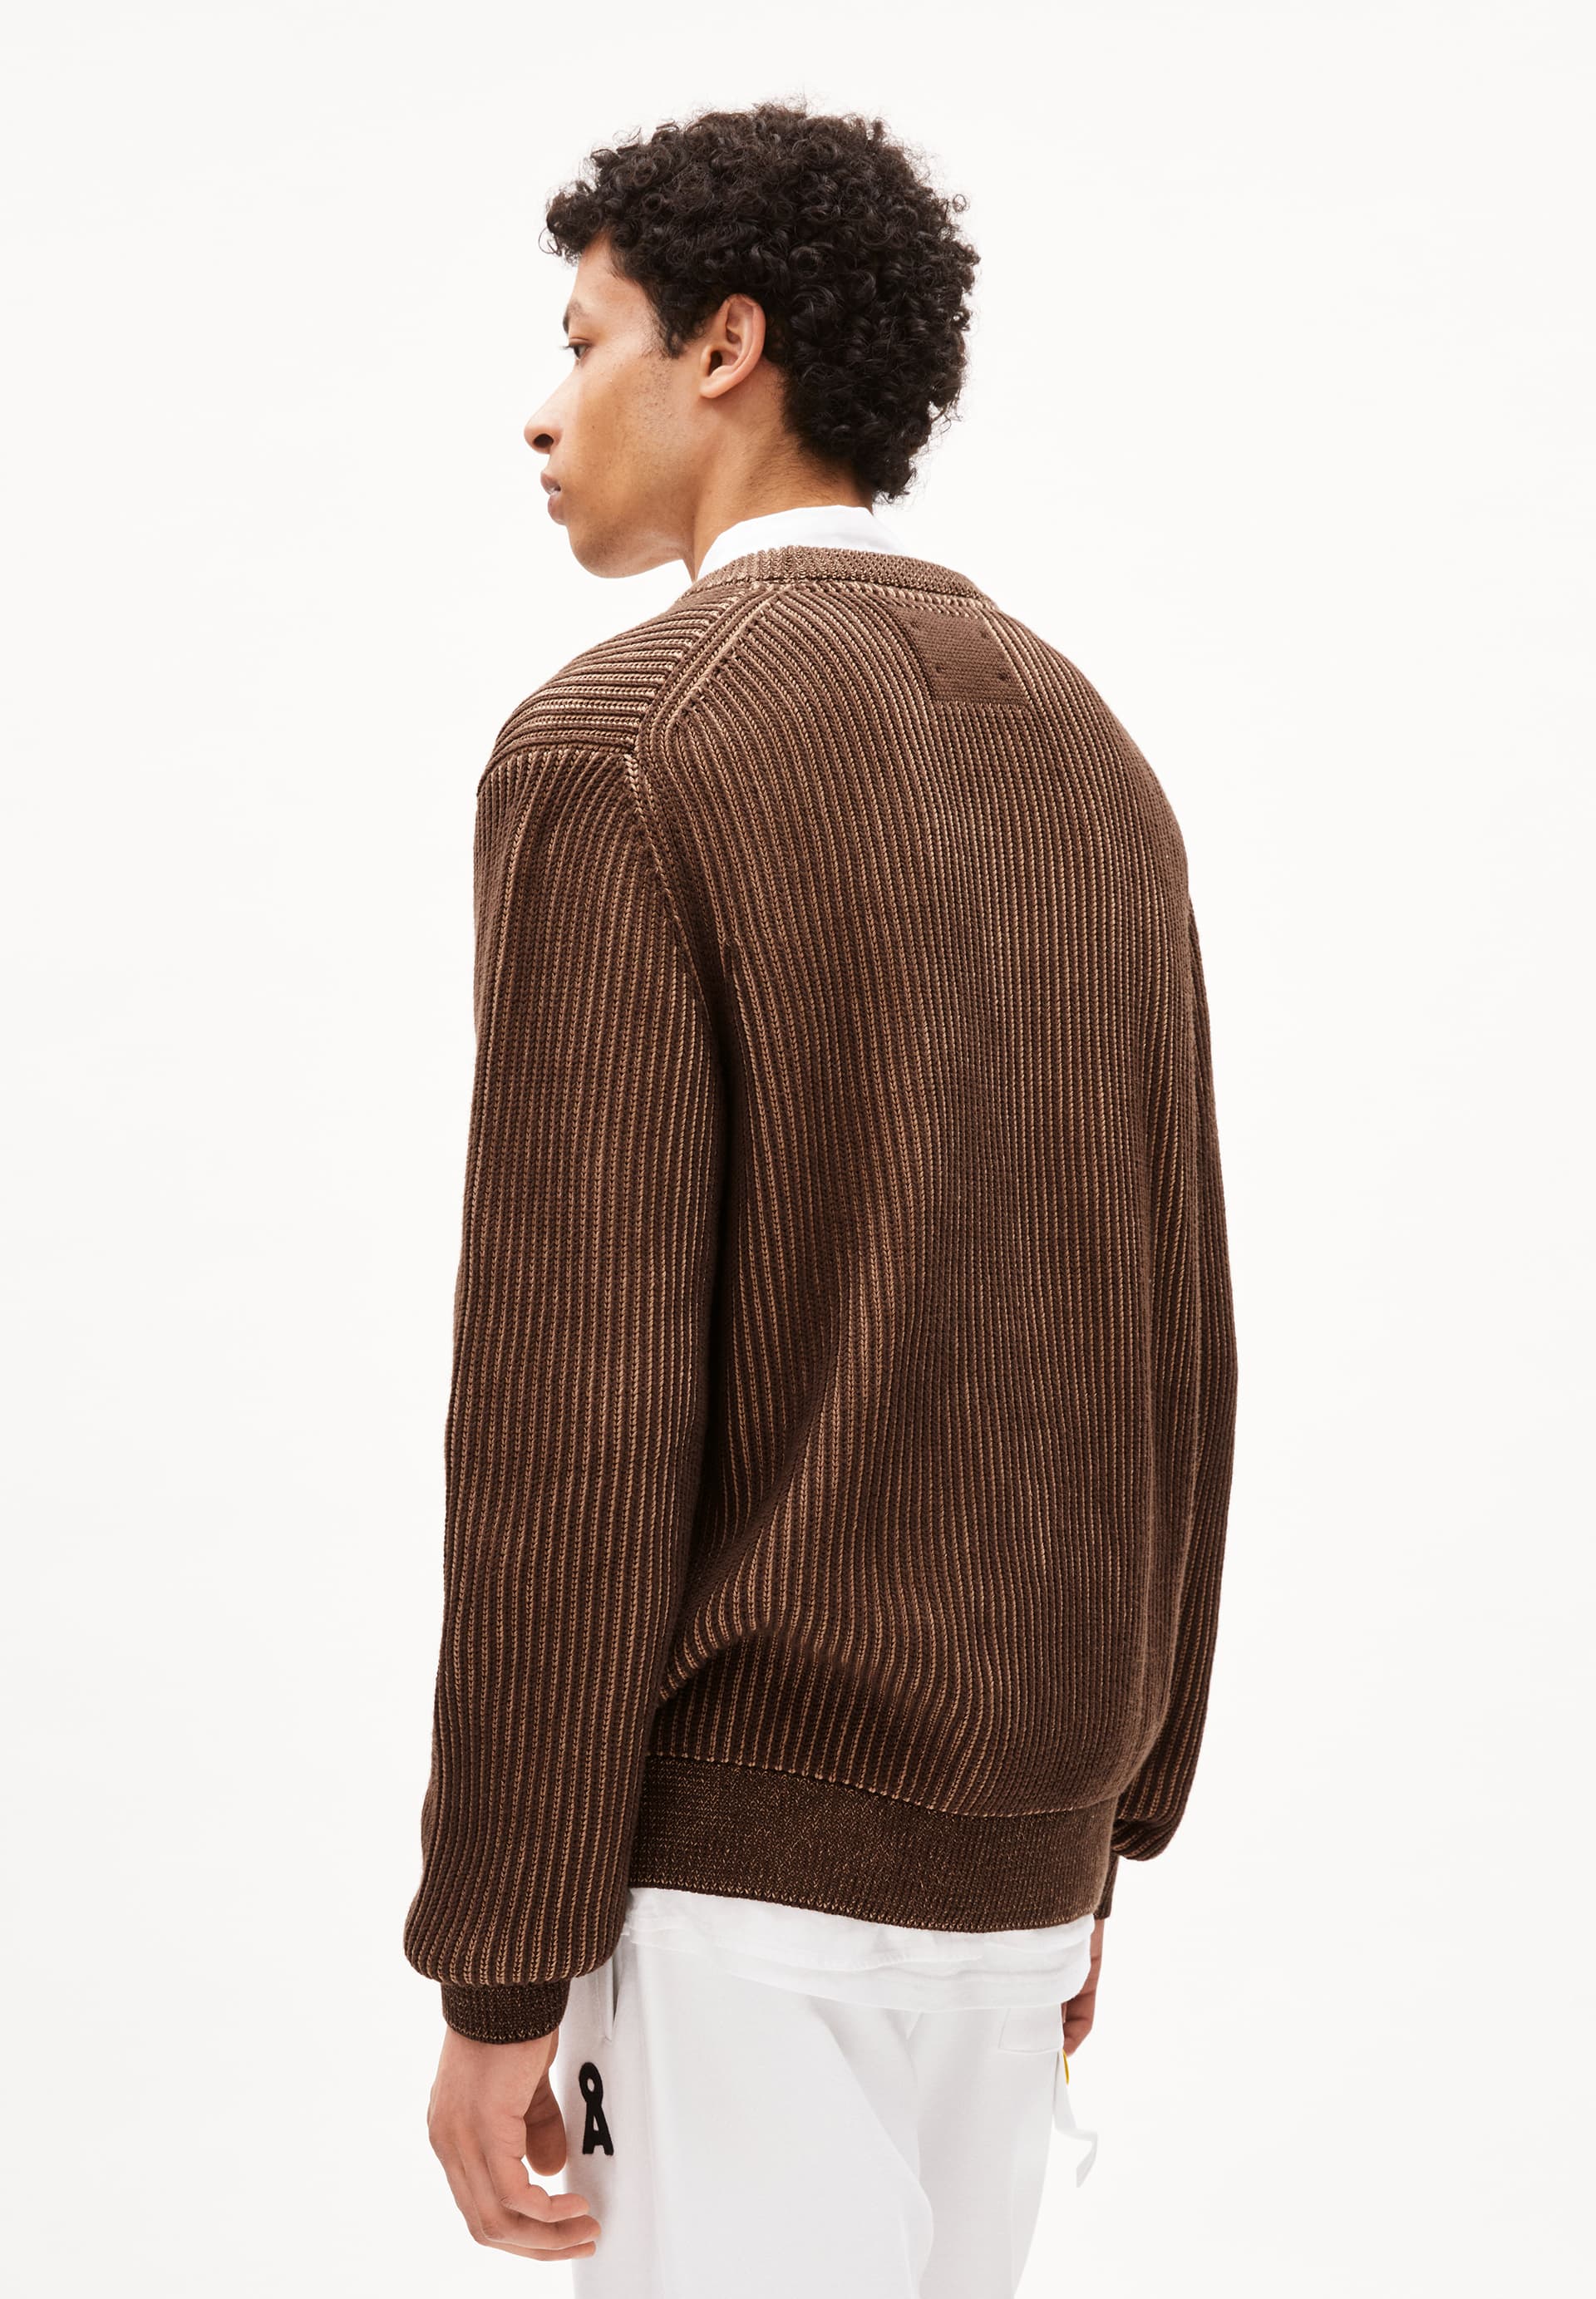 ANDRAAS Sweater Regular Fit made of Organic Cotton